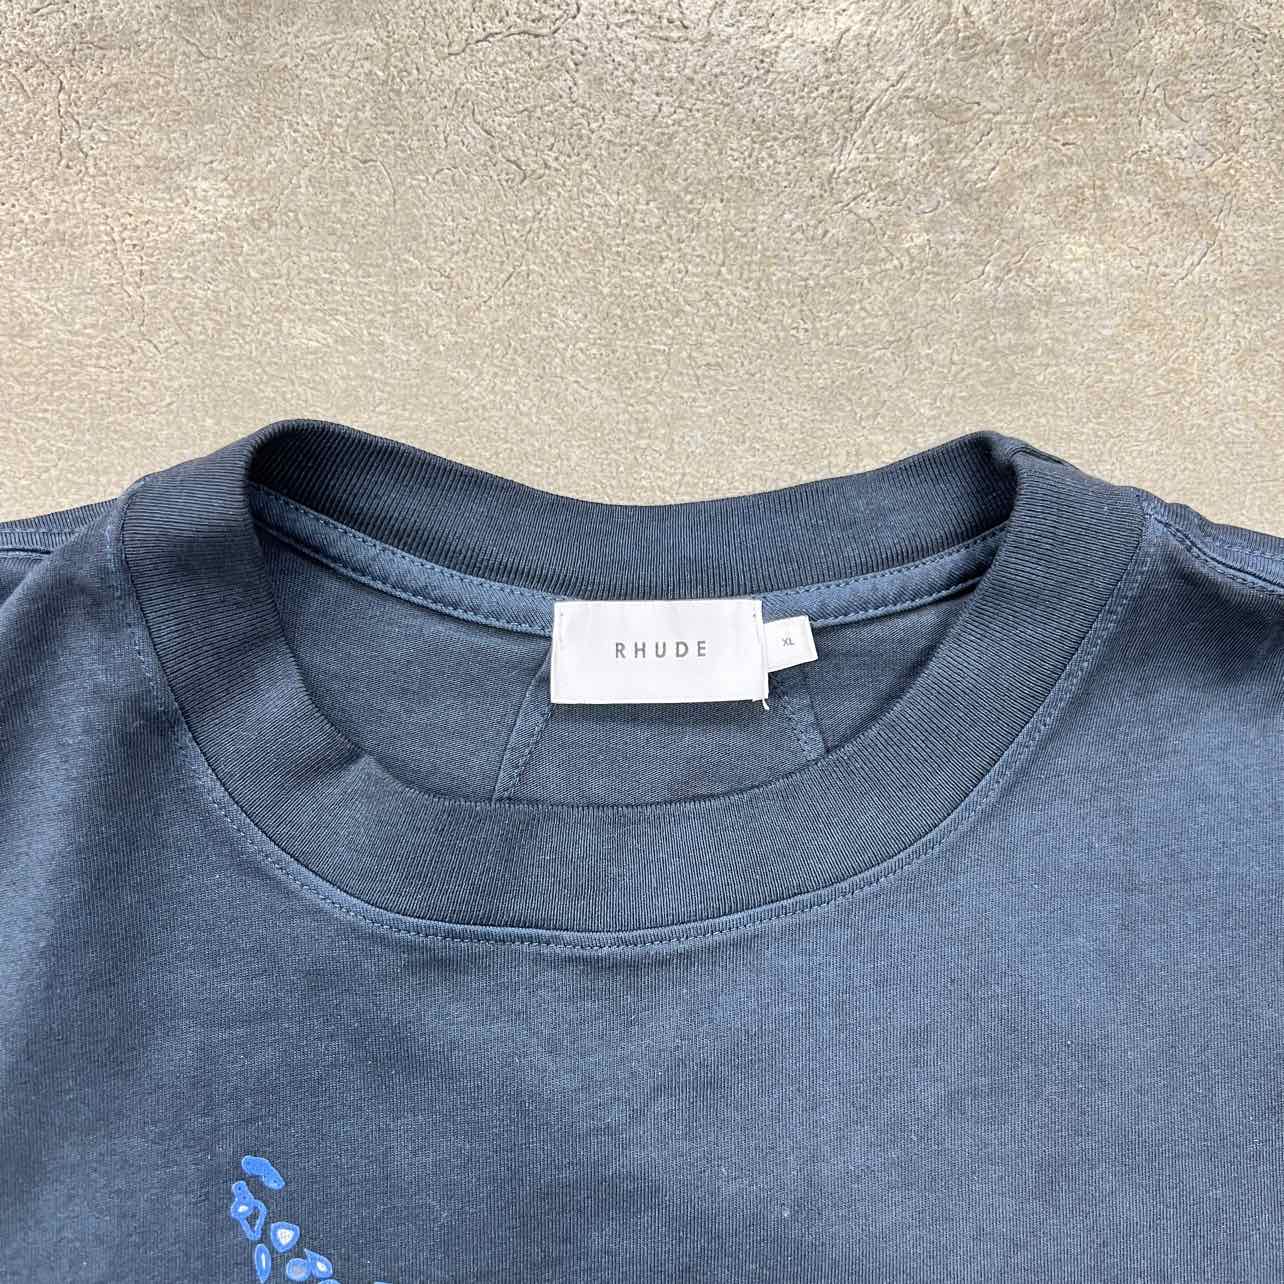 Rhude T-Shirt &quot;LEOPARD&quot; Navy Used Size XL